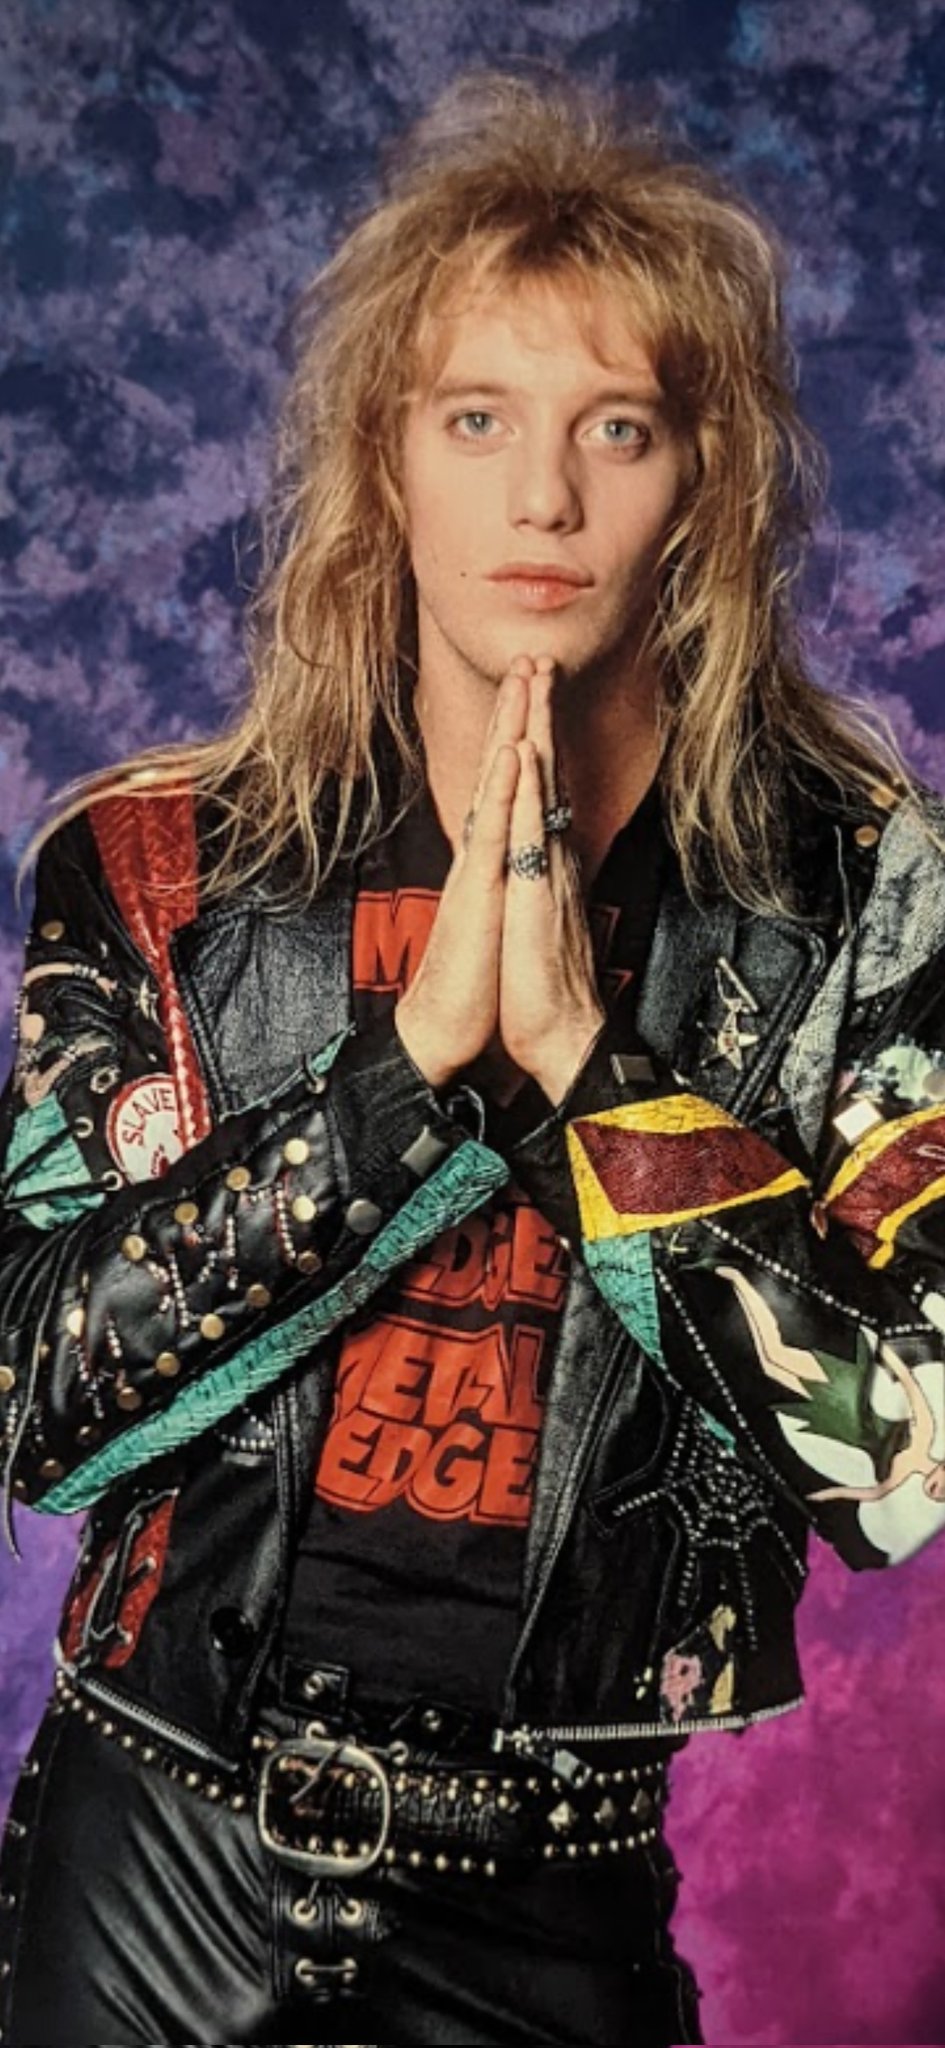 Warrant Happy Birthday Up In Heaven To Jani Lane Rip T Co Fyldkbghle Twitter